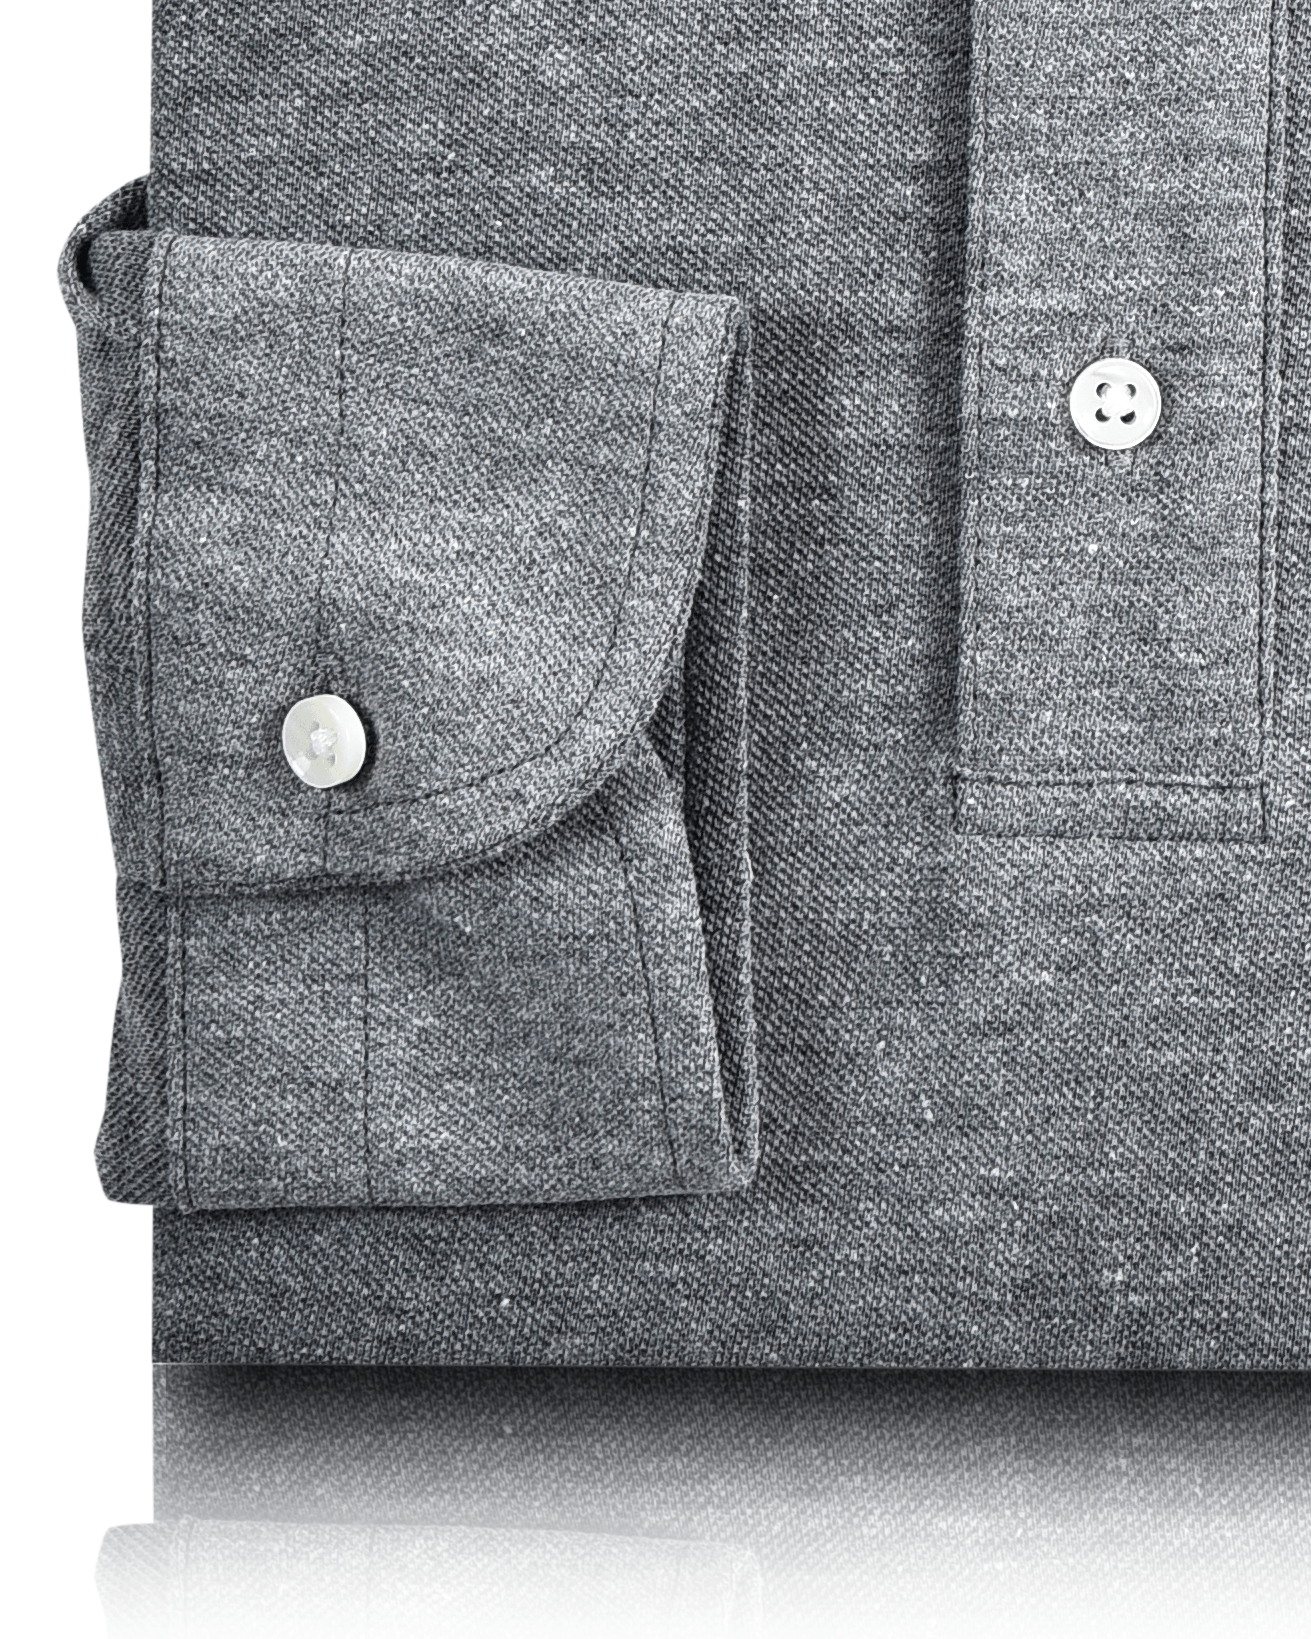 Cuff of the custom oxford polo shirt for men by Luxire in slate grey